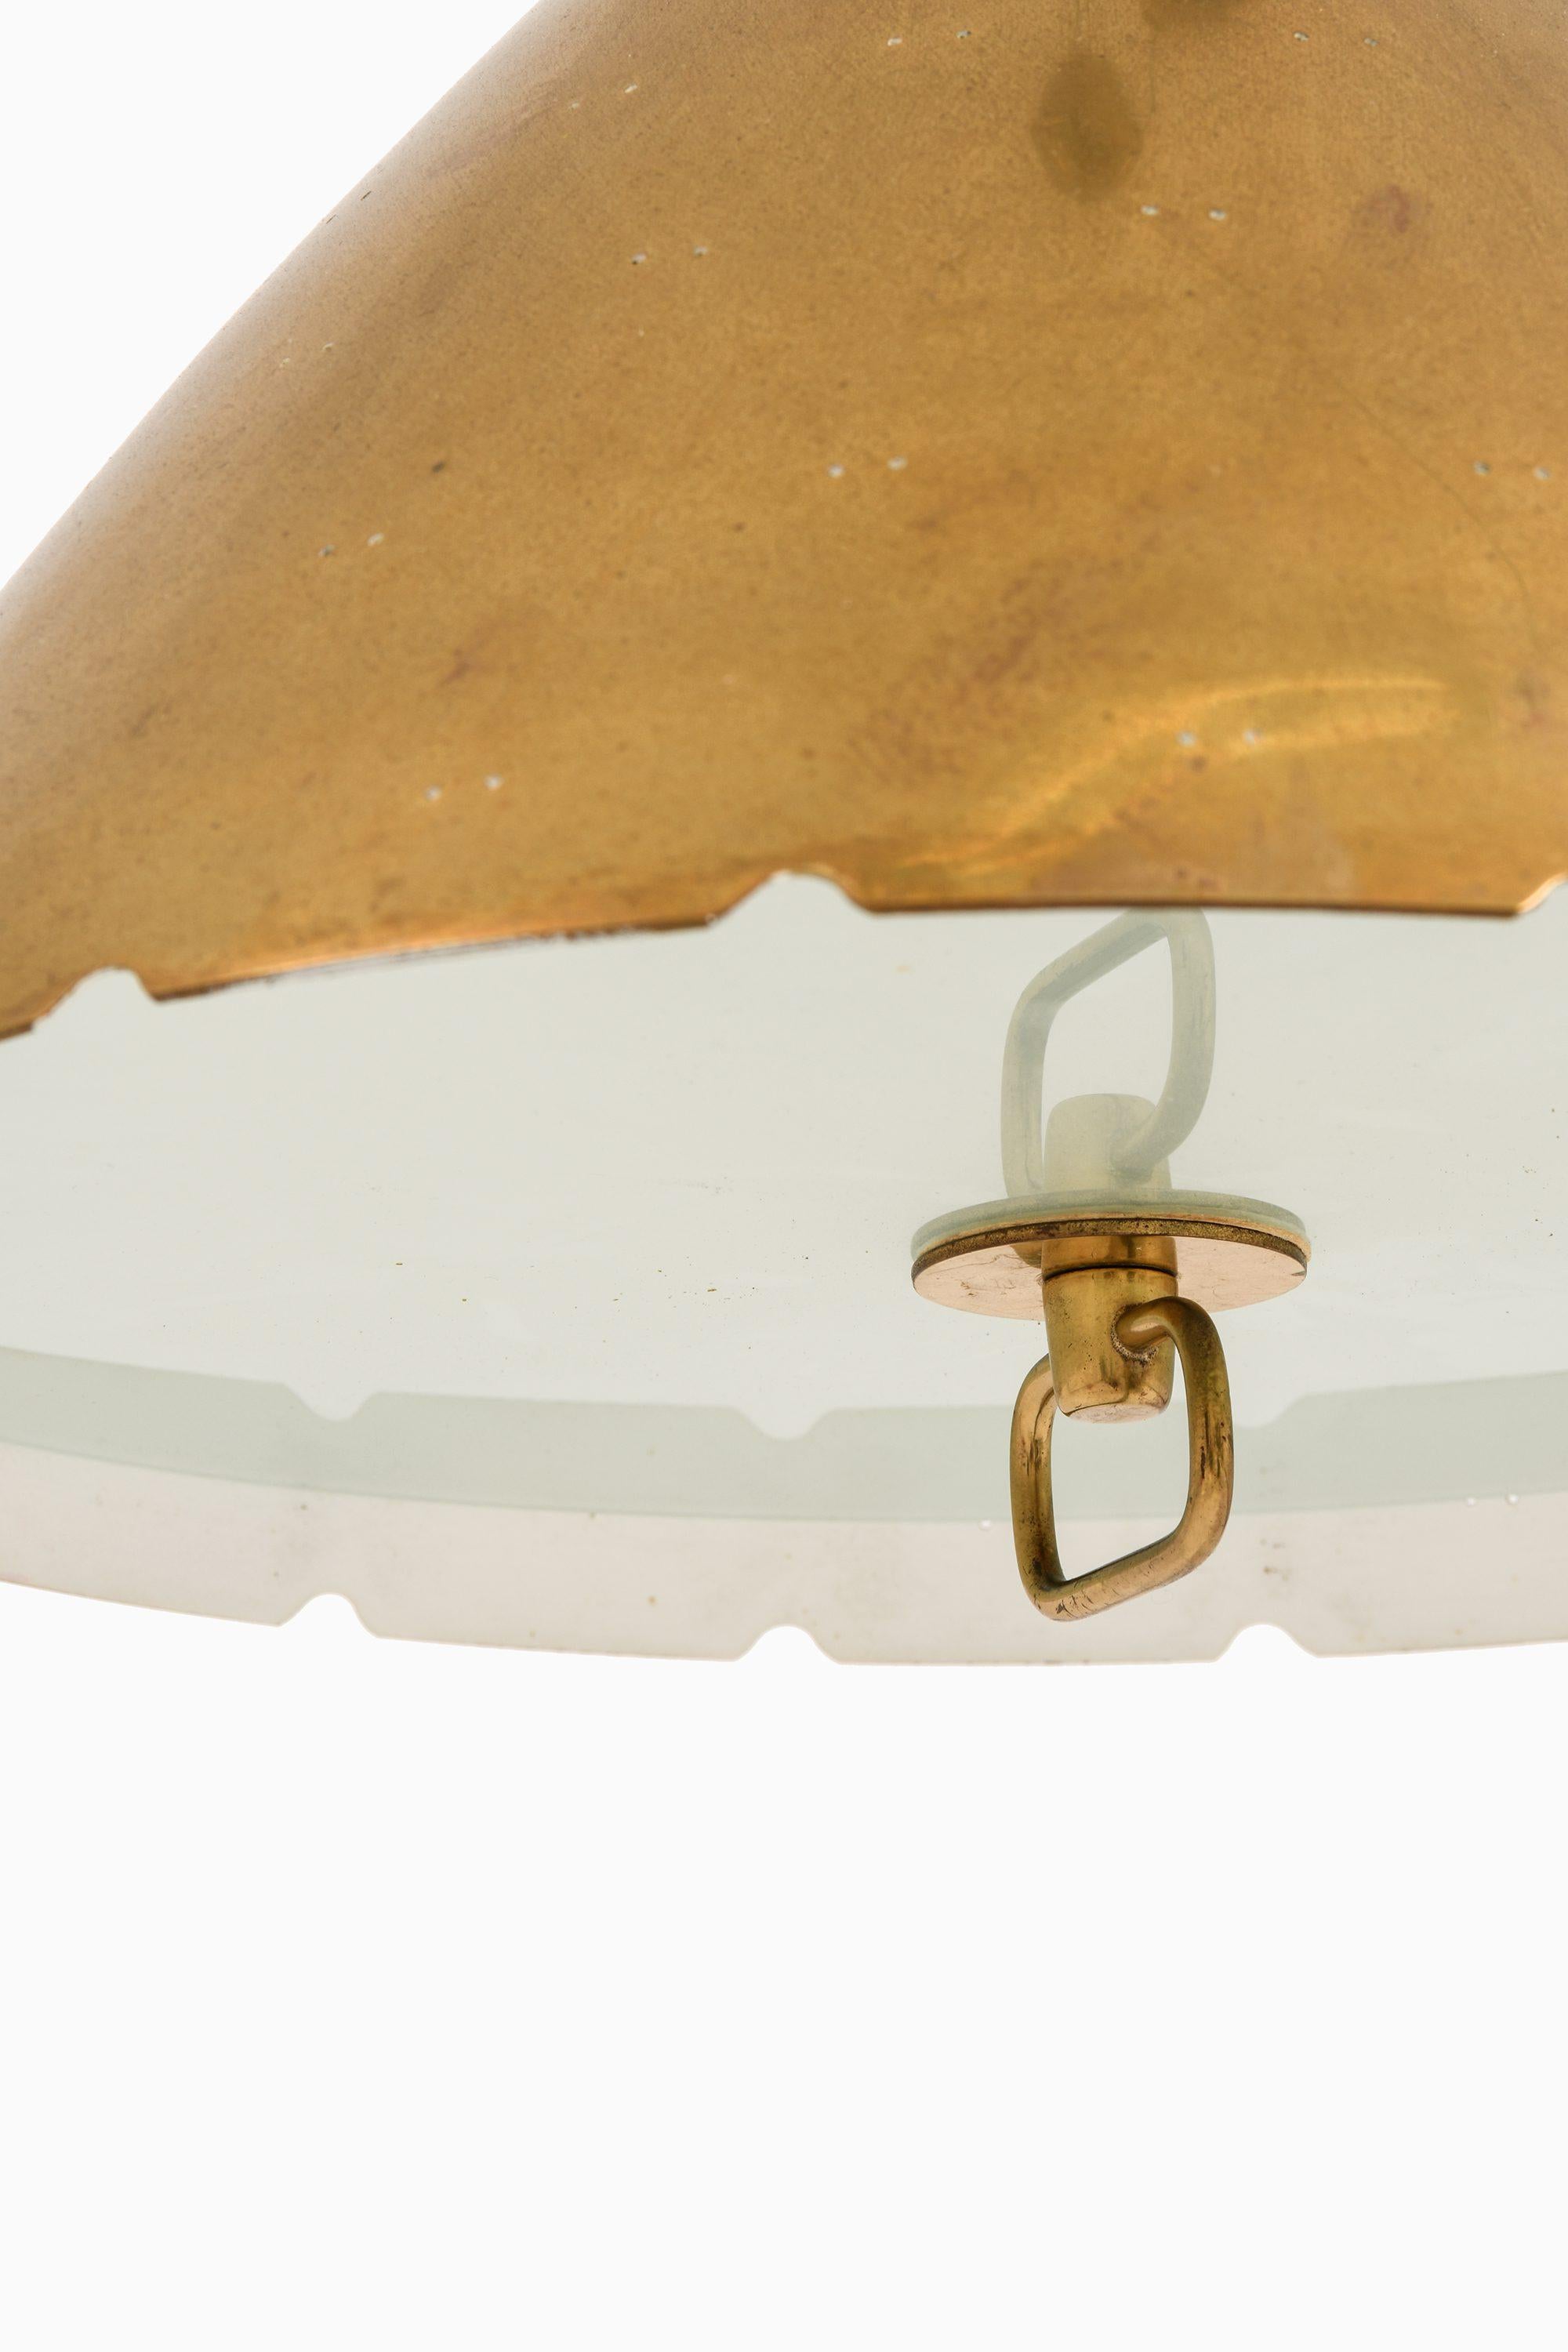 Scandinavian Modern Ceiling Lamp in Brass and Glass by Paavo Tynell, 1950's For Sale